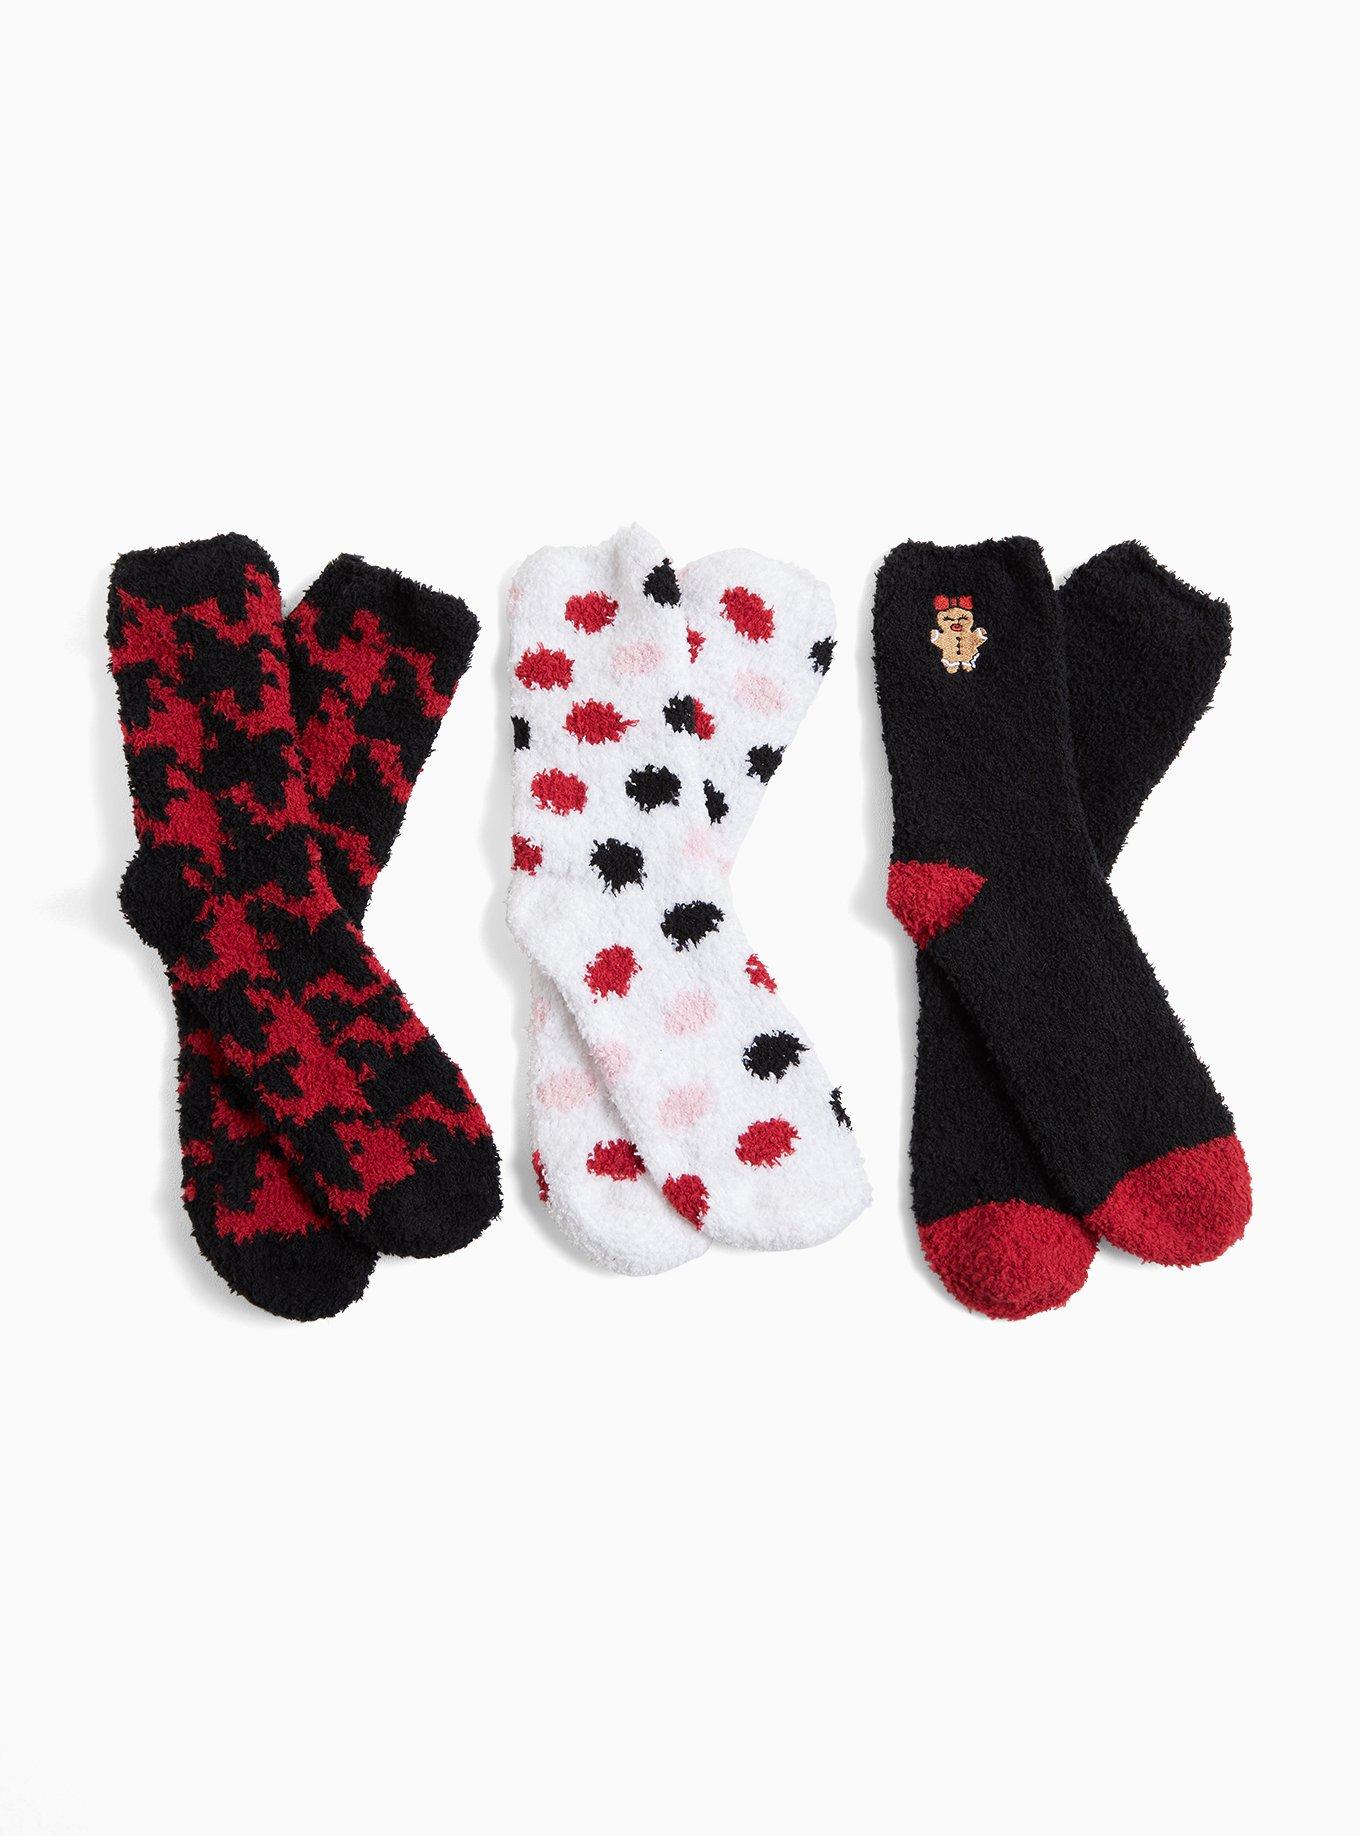 Plus Size - Betsey Johnson Black & Red Holiday Socks Pack - Pack of 3 ...